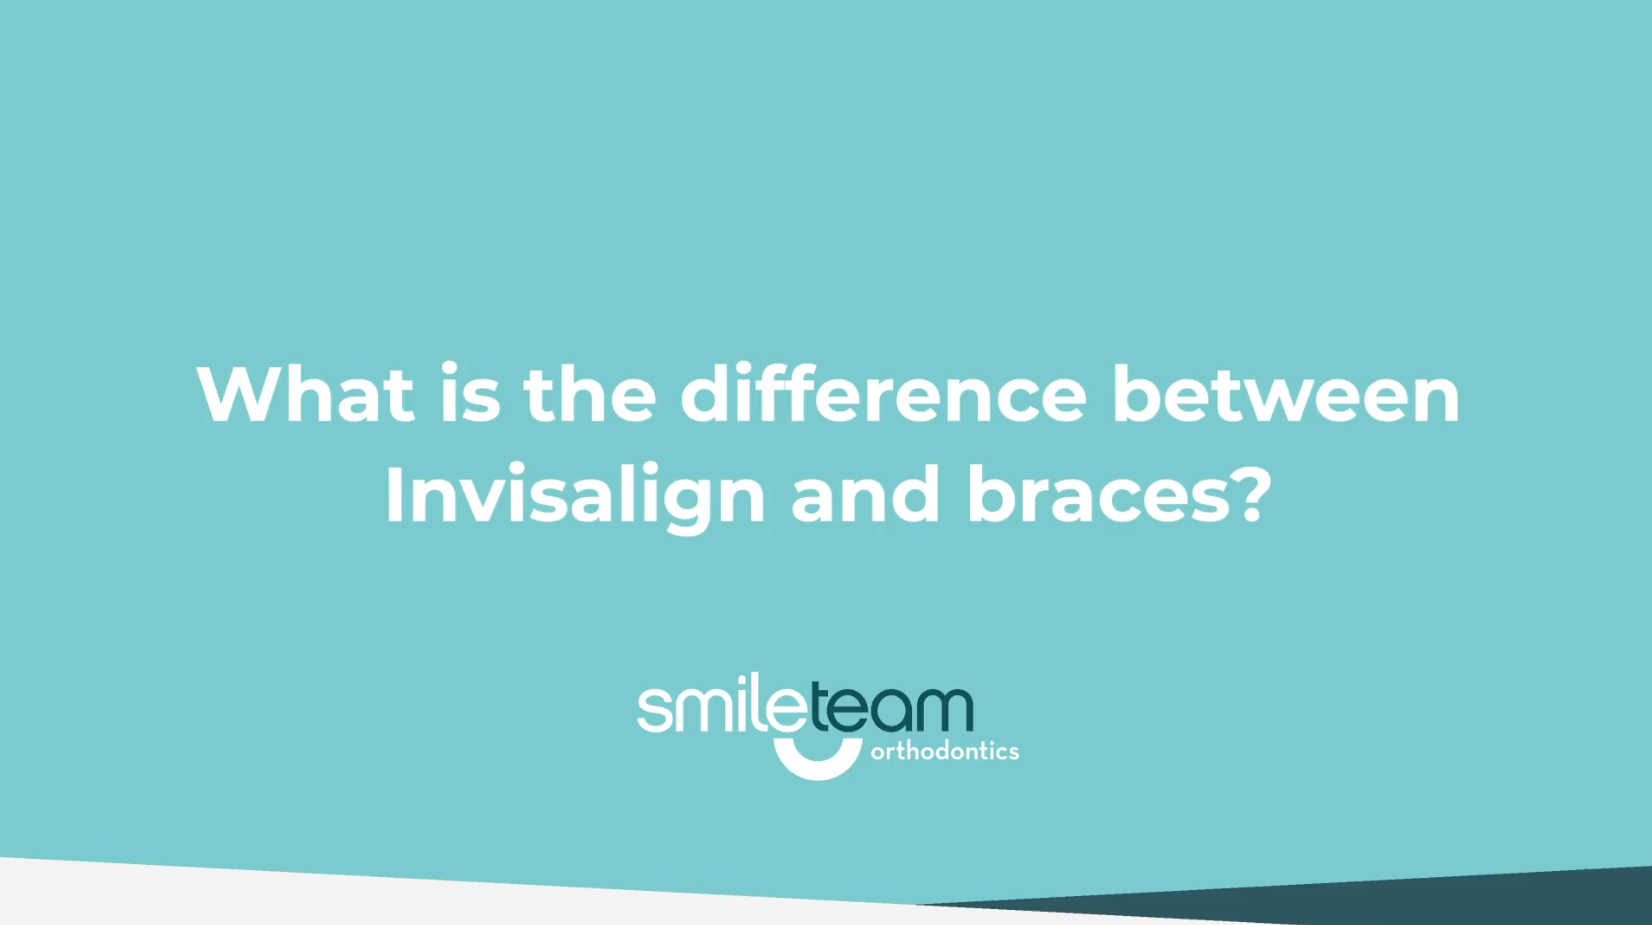 What is the difference between Invisalign and braces?